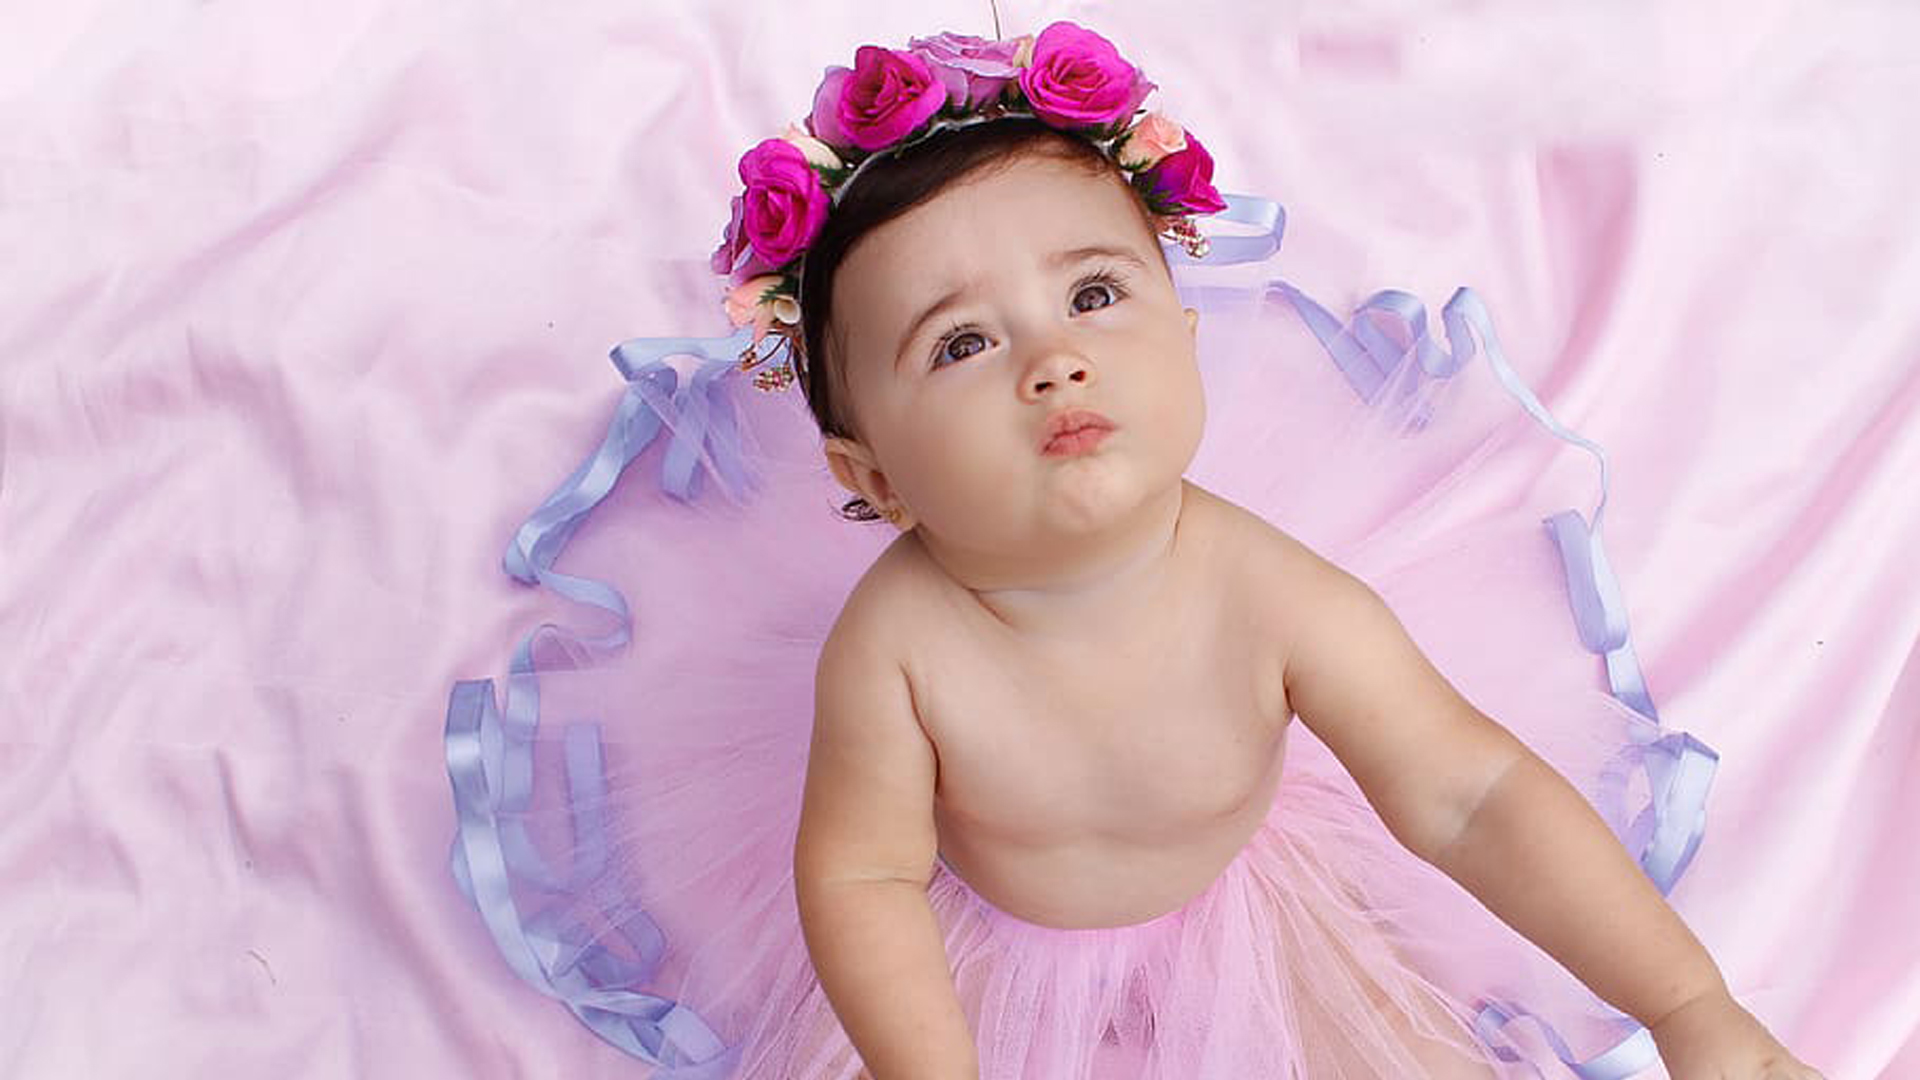 Girl Baby Child Is Looking Up Wearing Pink Satin Dress And Wreath HD